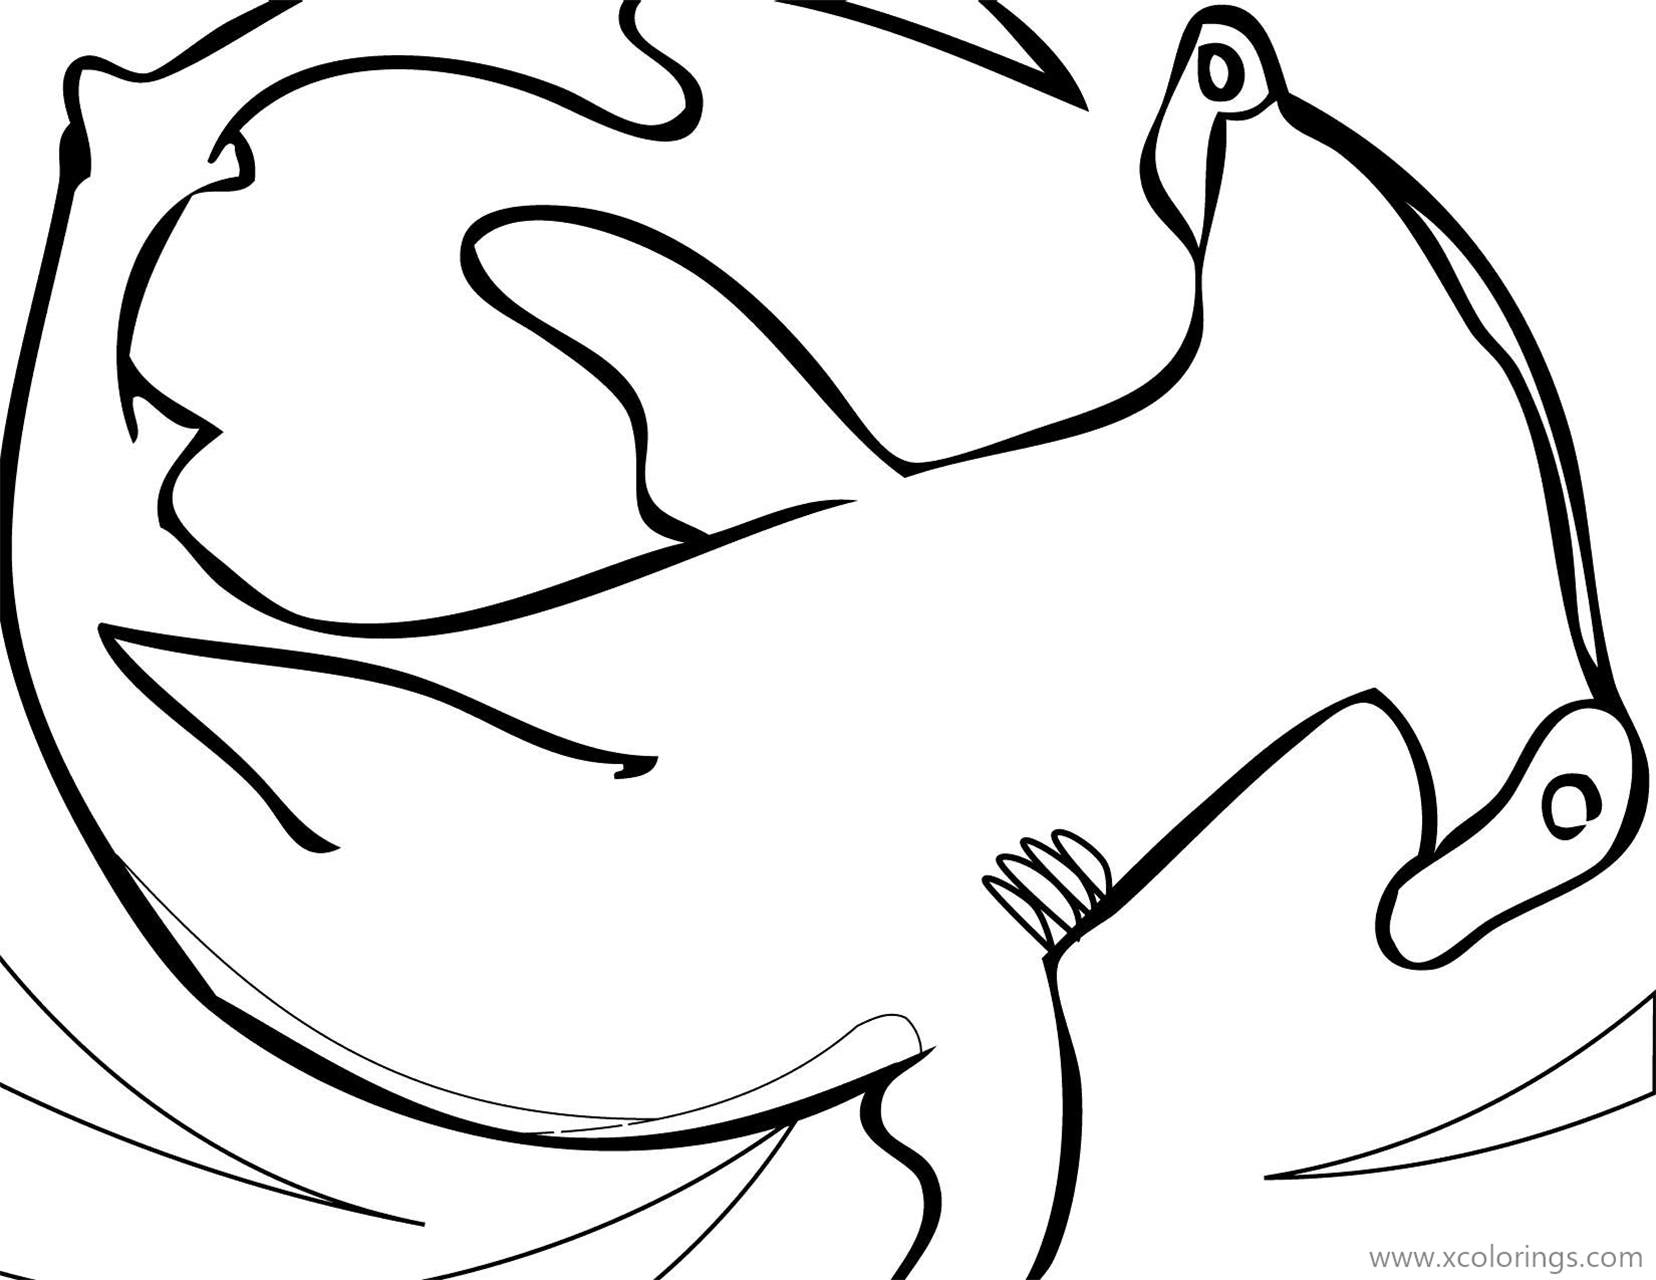 Free Hammerhead Shark Outline Coloring Pages printable